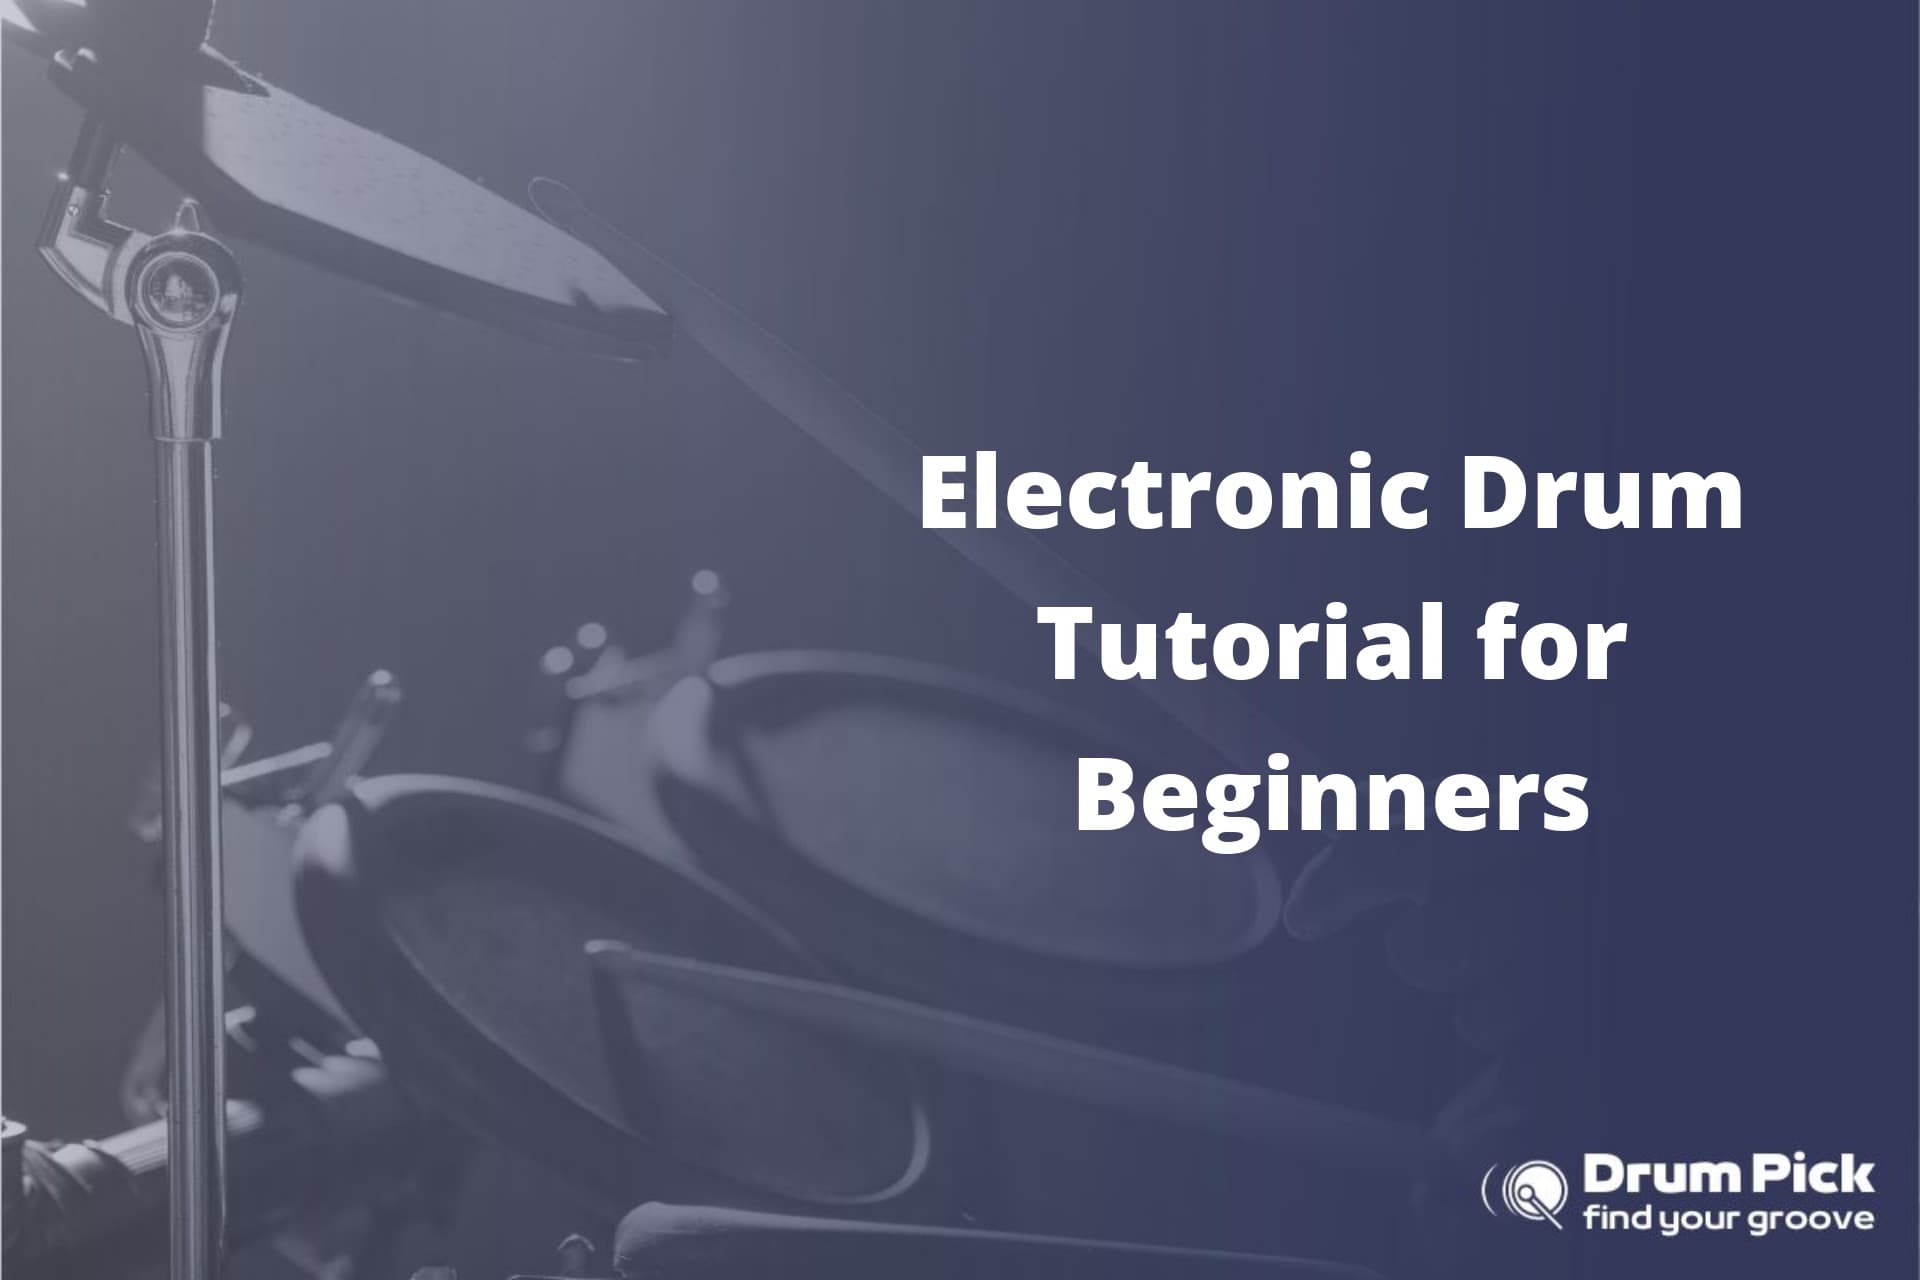 Electronic Drum Tutorial for Beginners